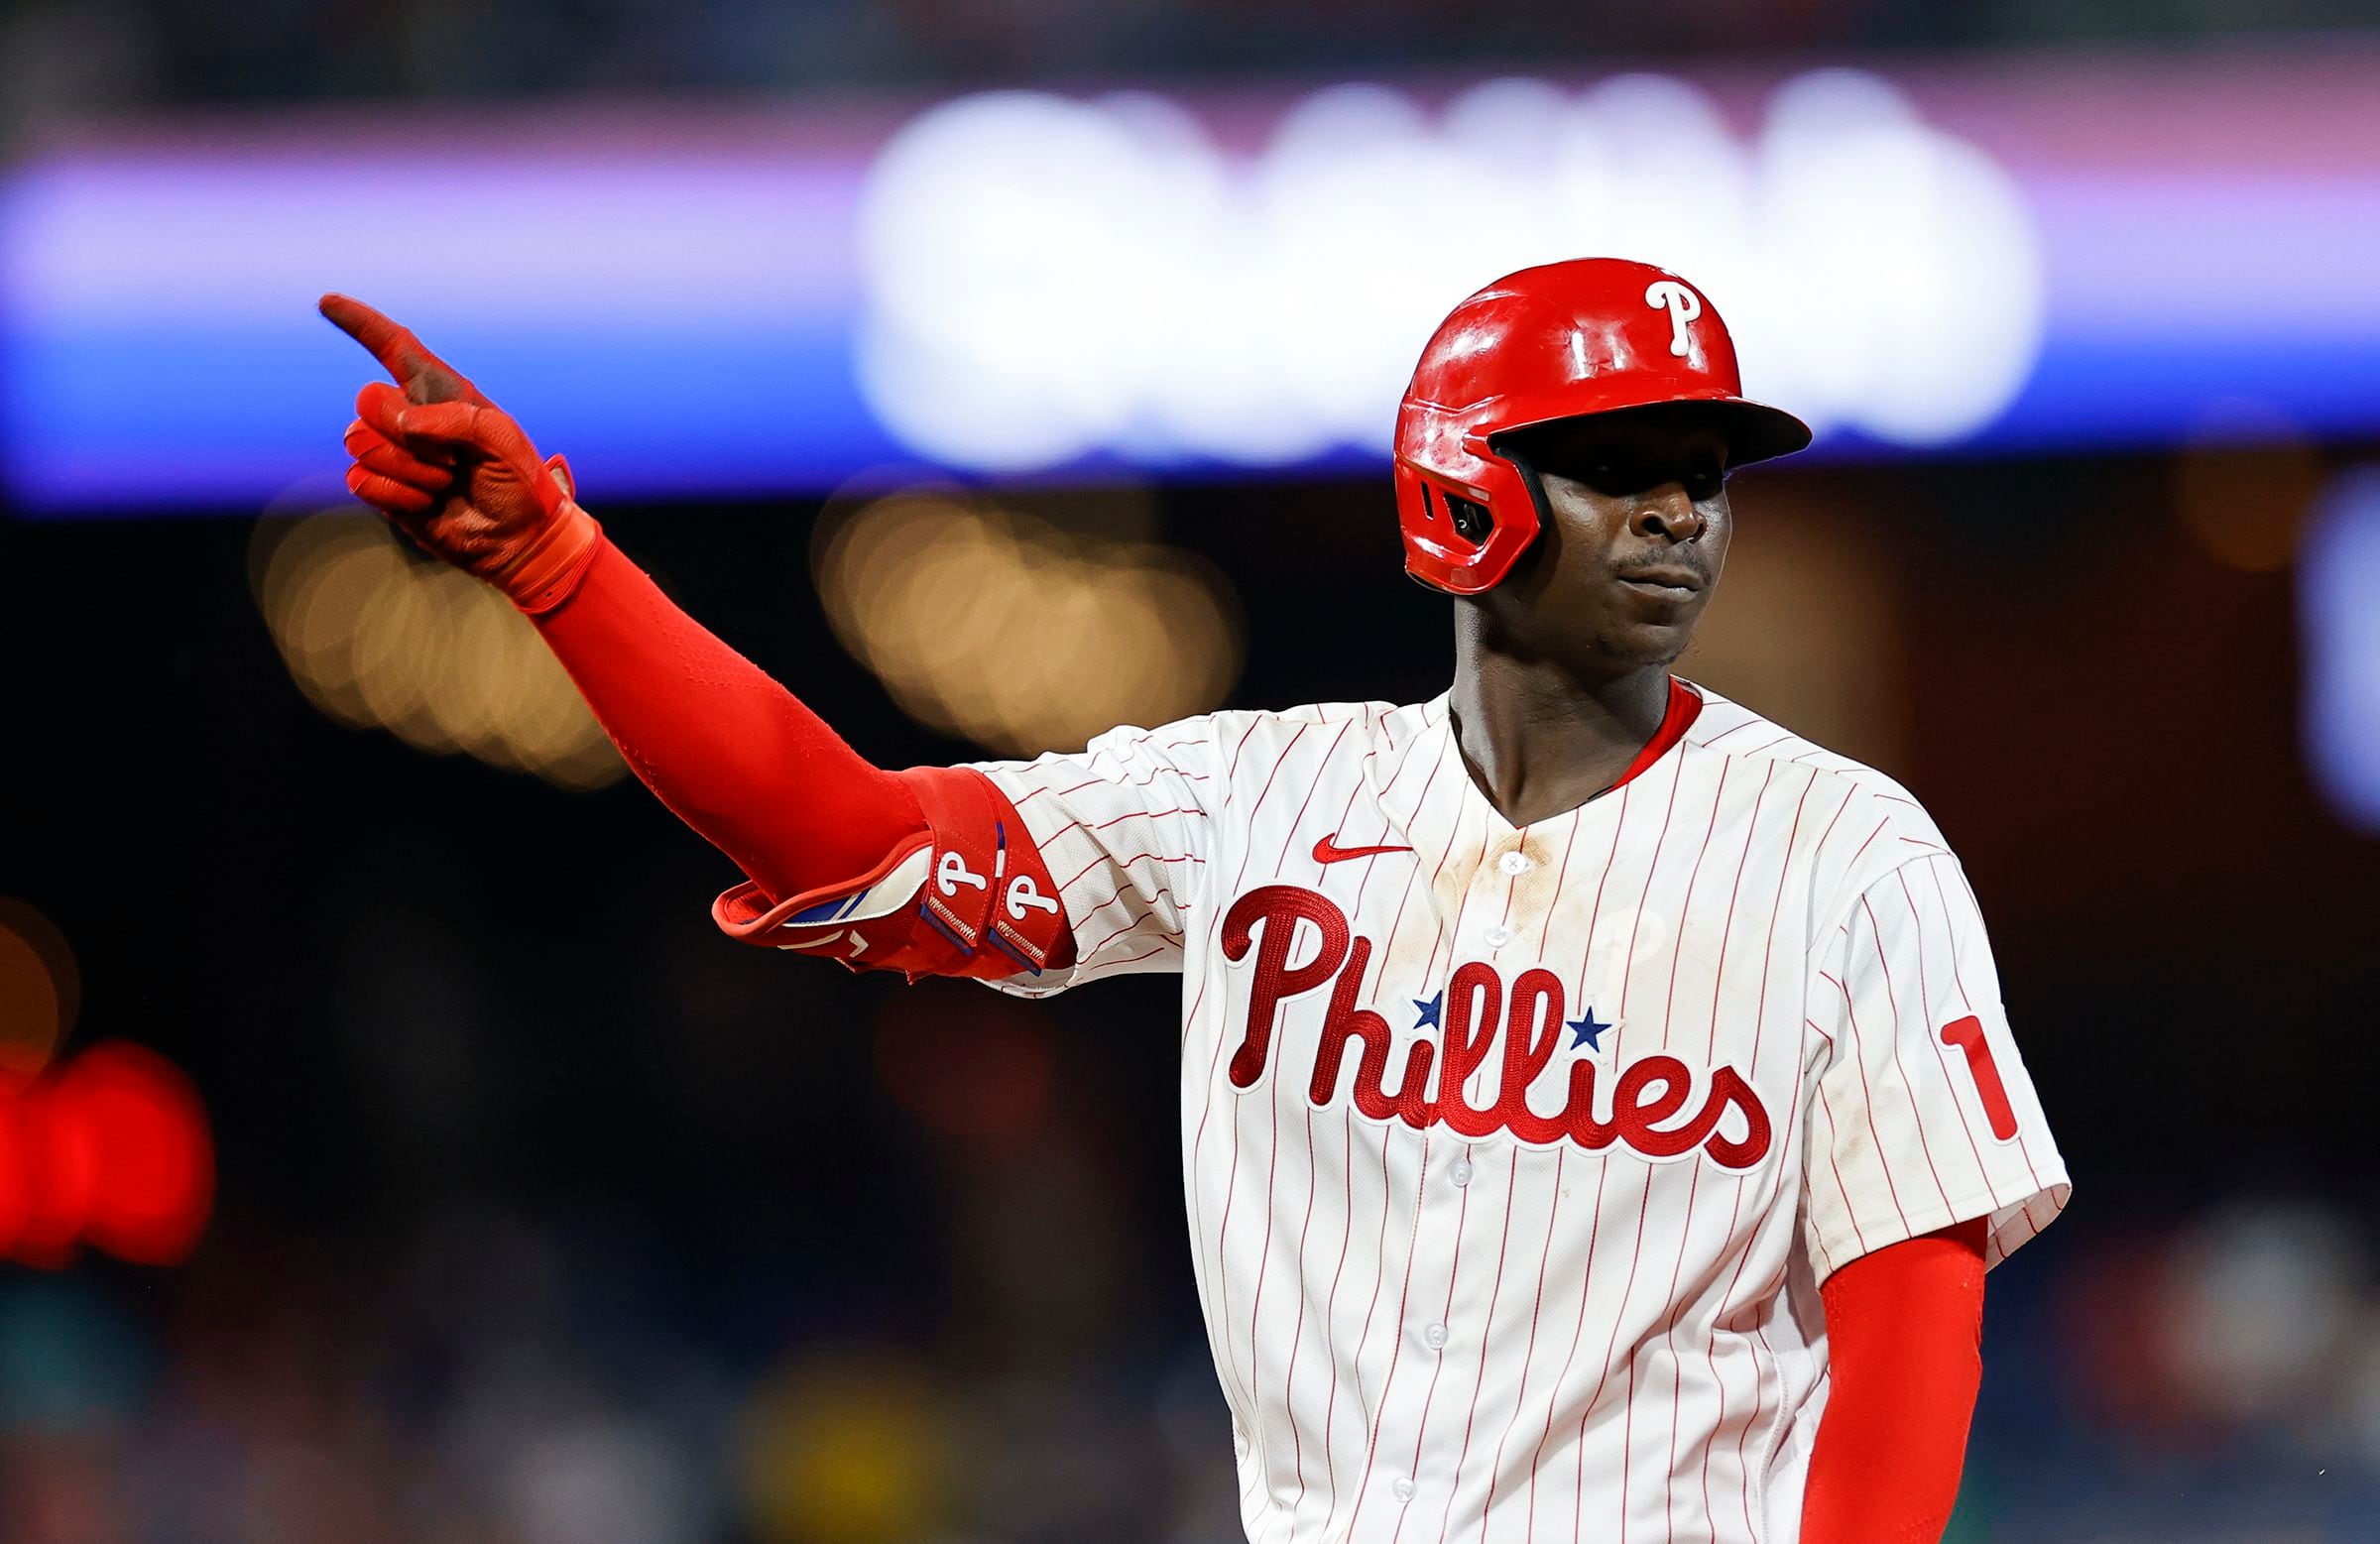 Why Didi Gregorius should not start in the playoffs